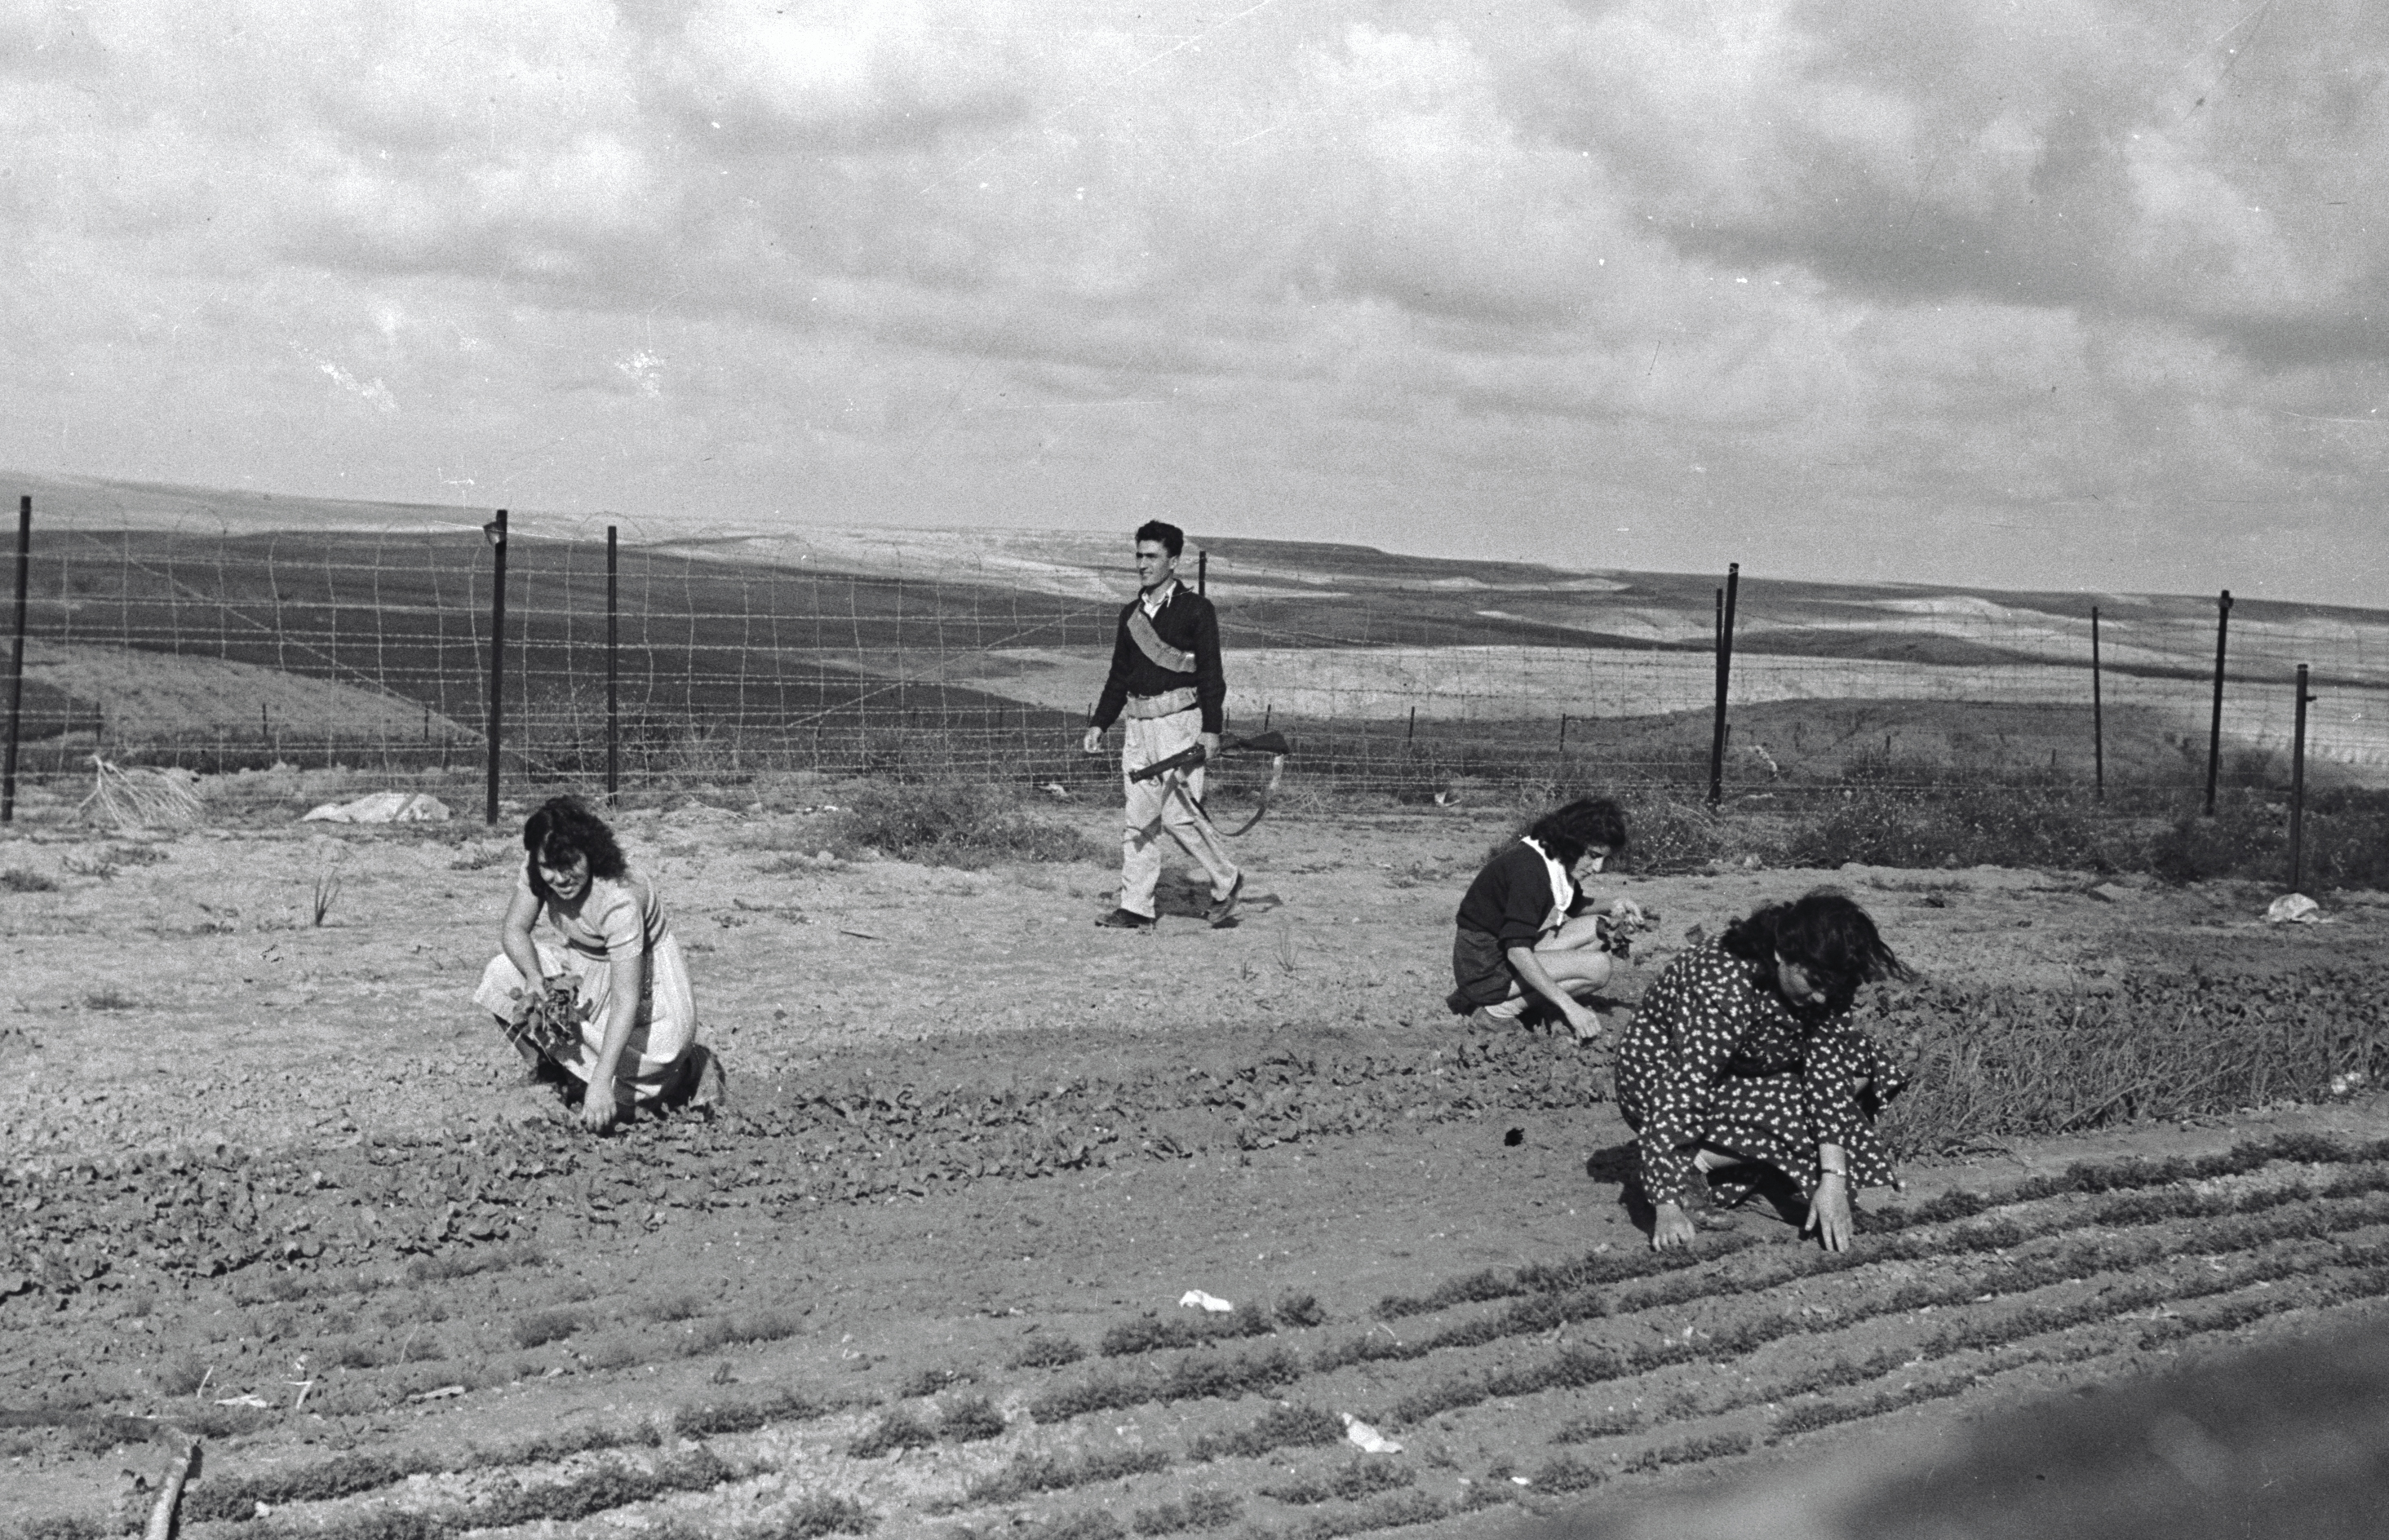 Beeri, working the fields, 1948, Lasar Dunner KKL-JNF Photo Archive